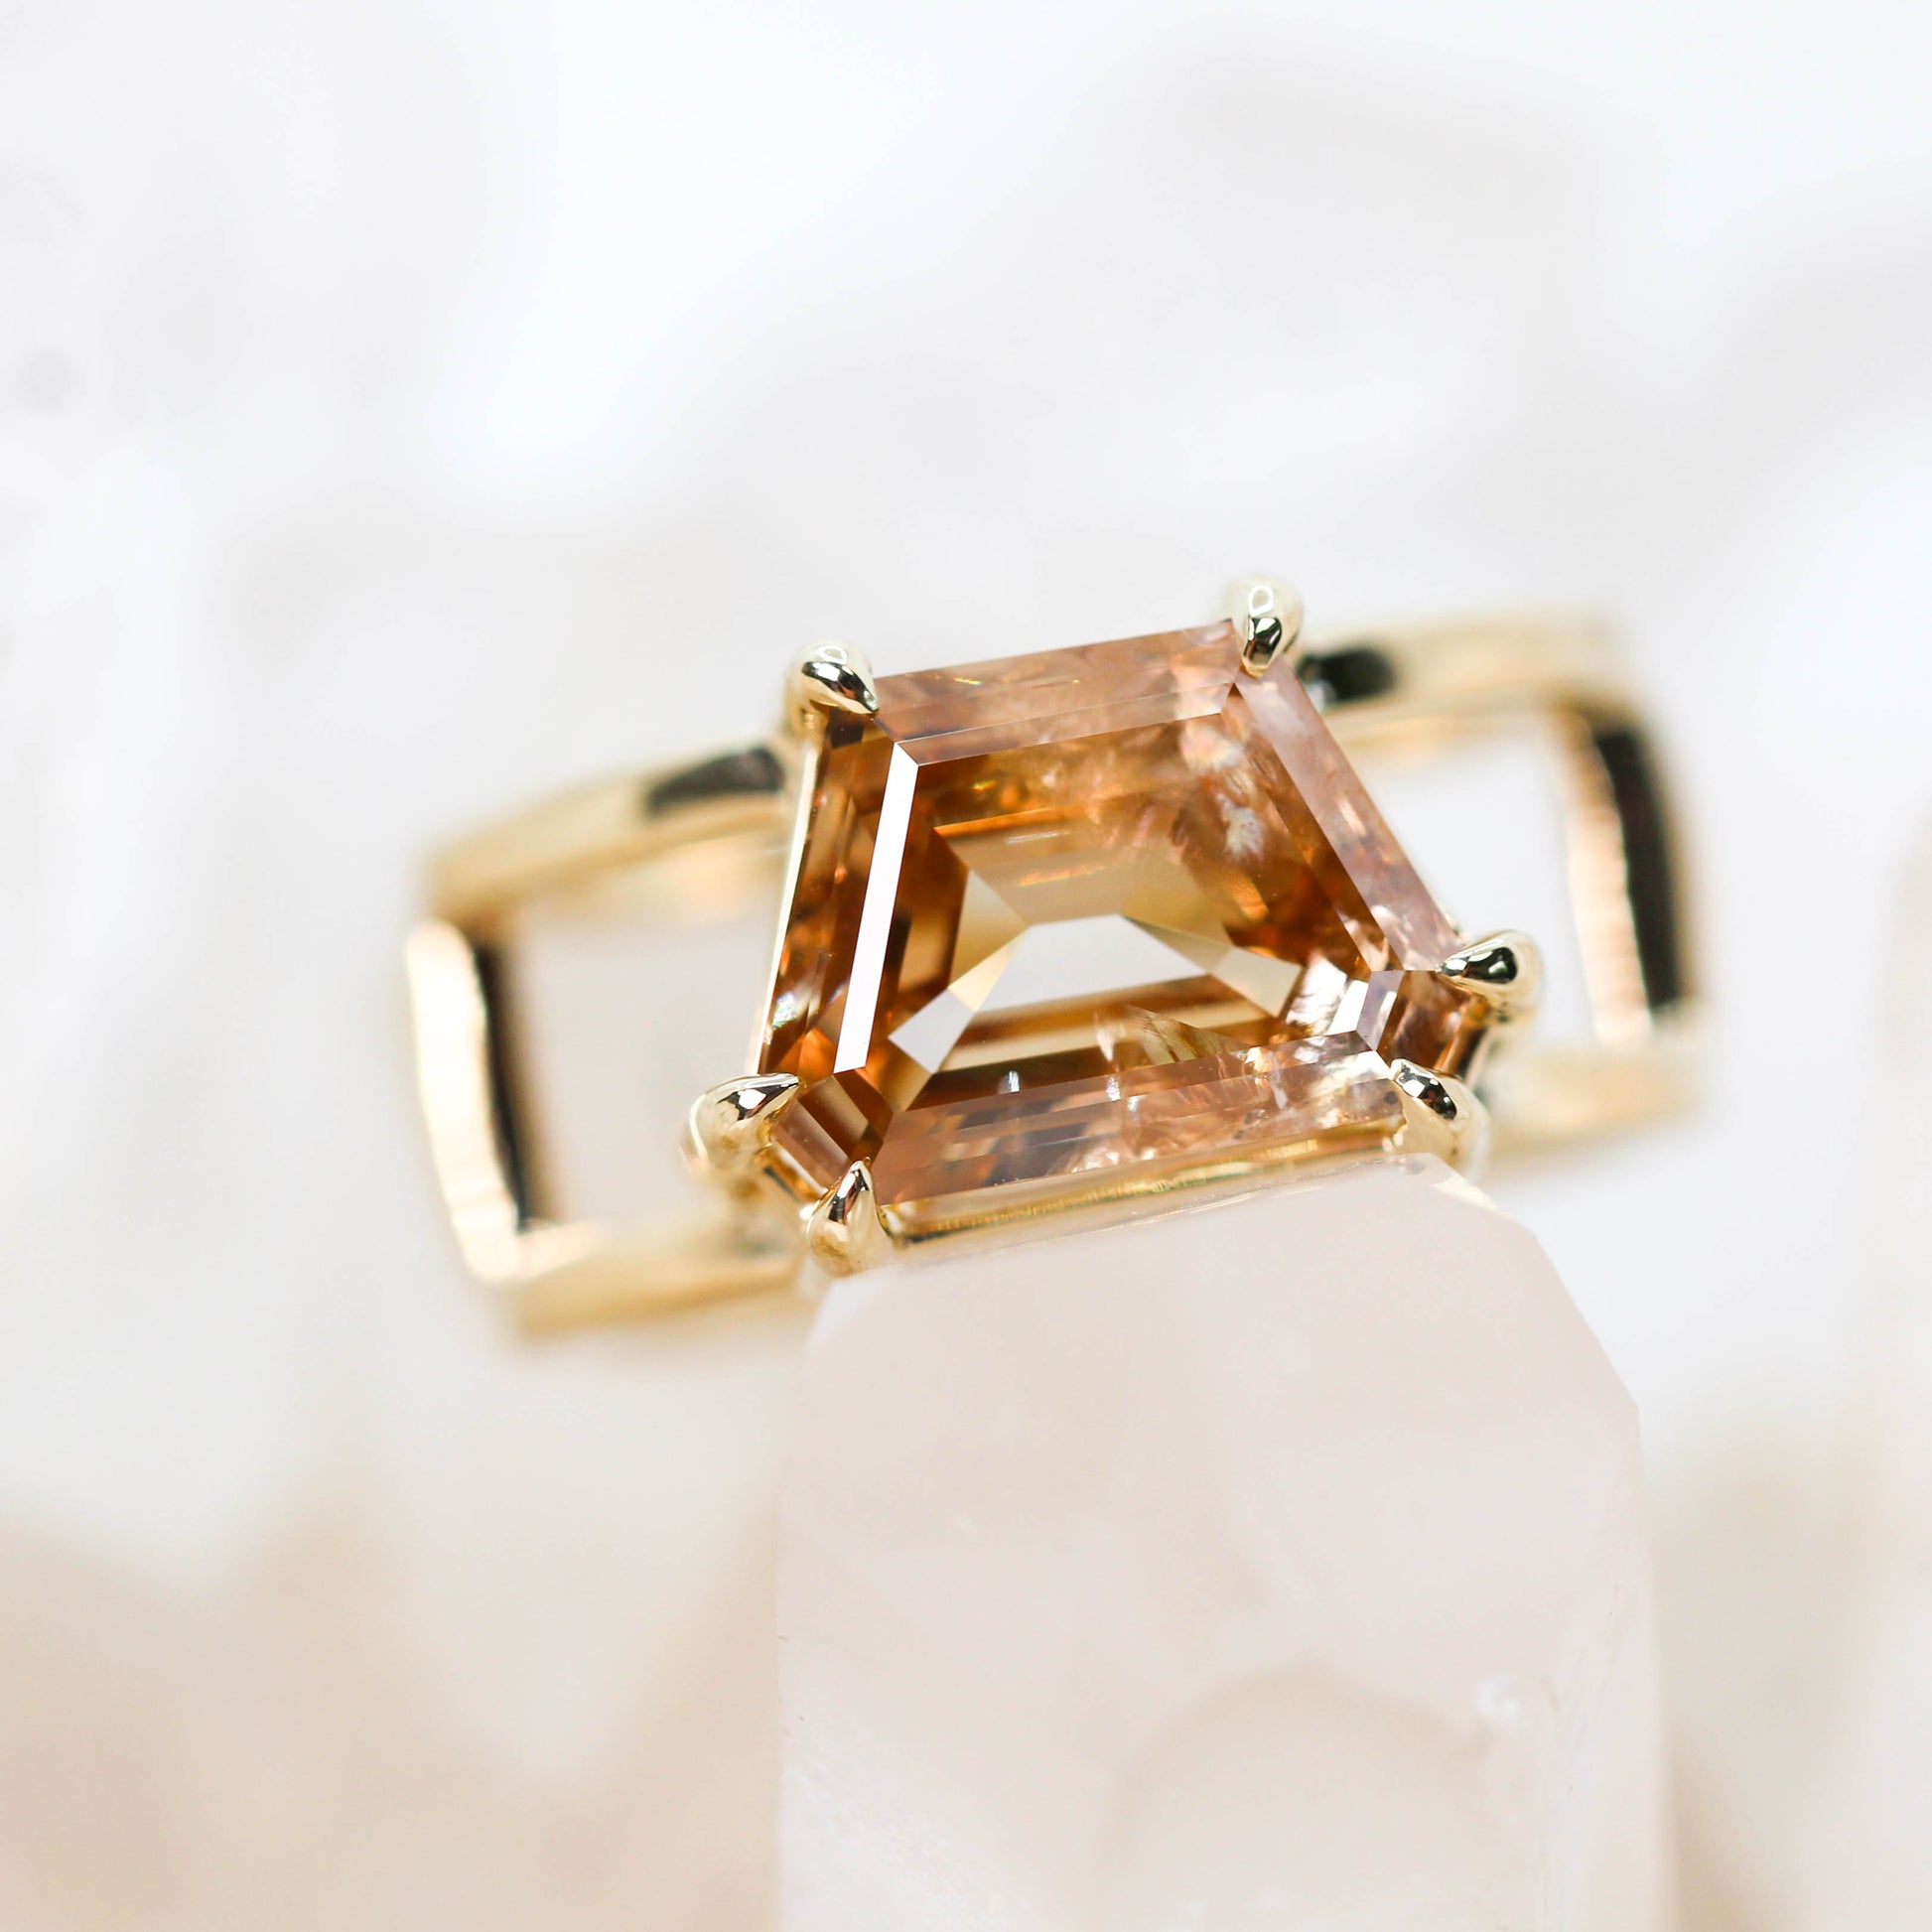 Marilyn Ring with a 3.70 Carat Champagne Trapezoid Diamond in 14k Yellow Gold - Ready to Size and Ship - Midwinter Co. Alternative Bridal Rings and Modern Fine Jewelry